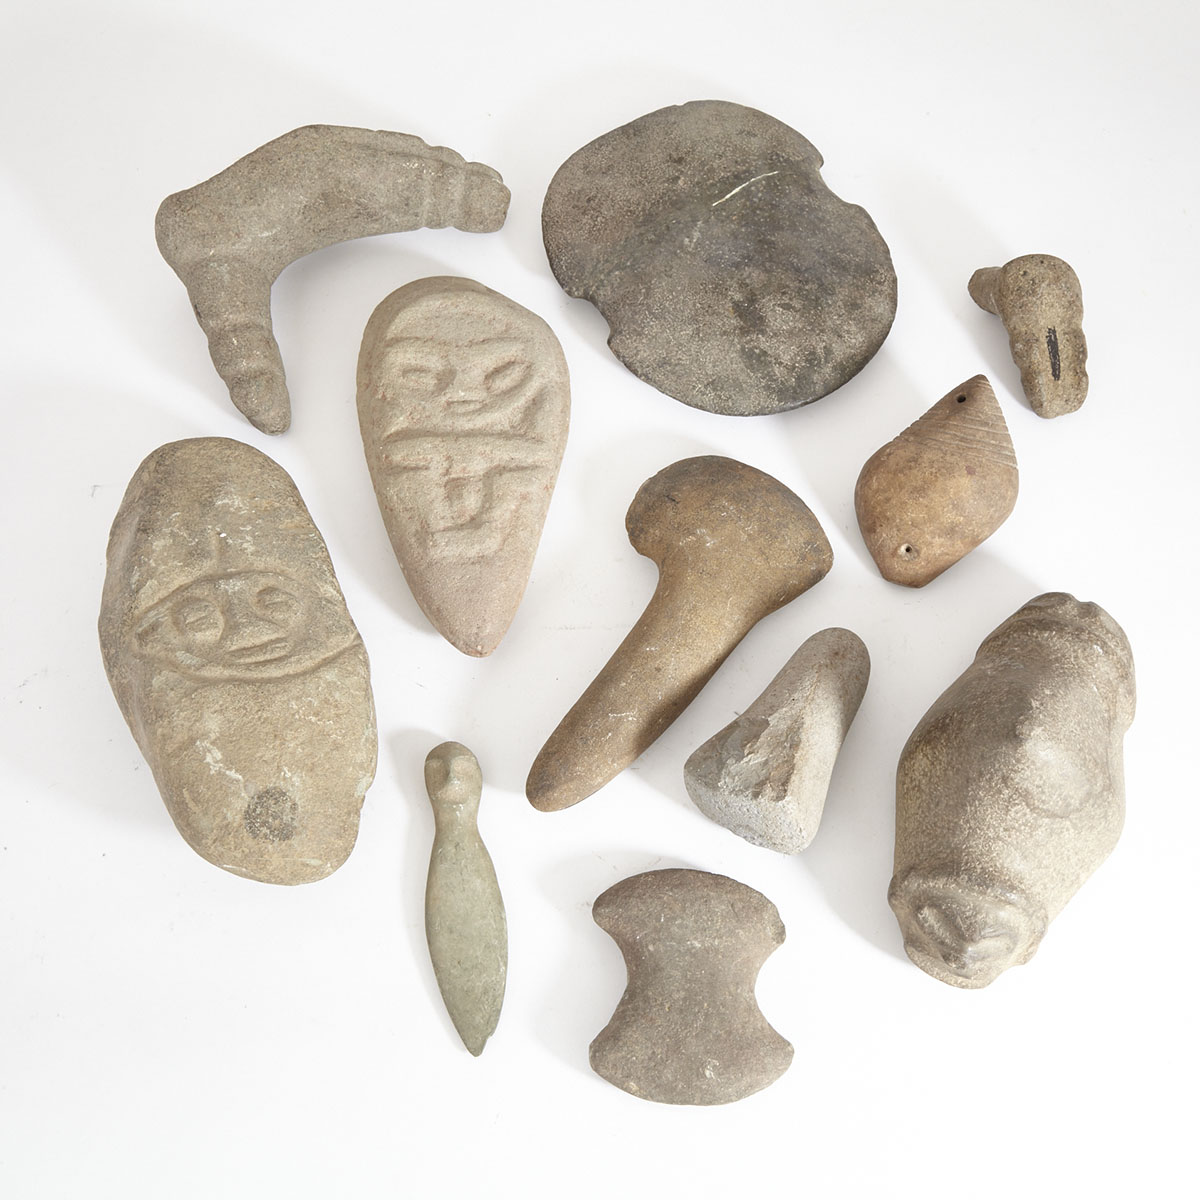 Group of Eleven Stone Sculptures and Tools